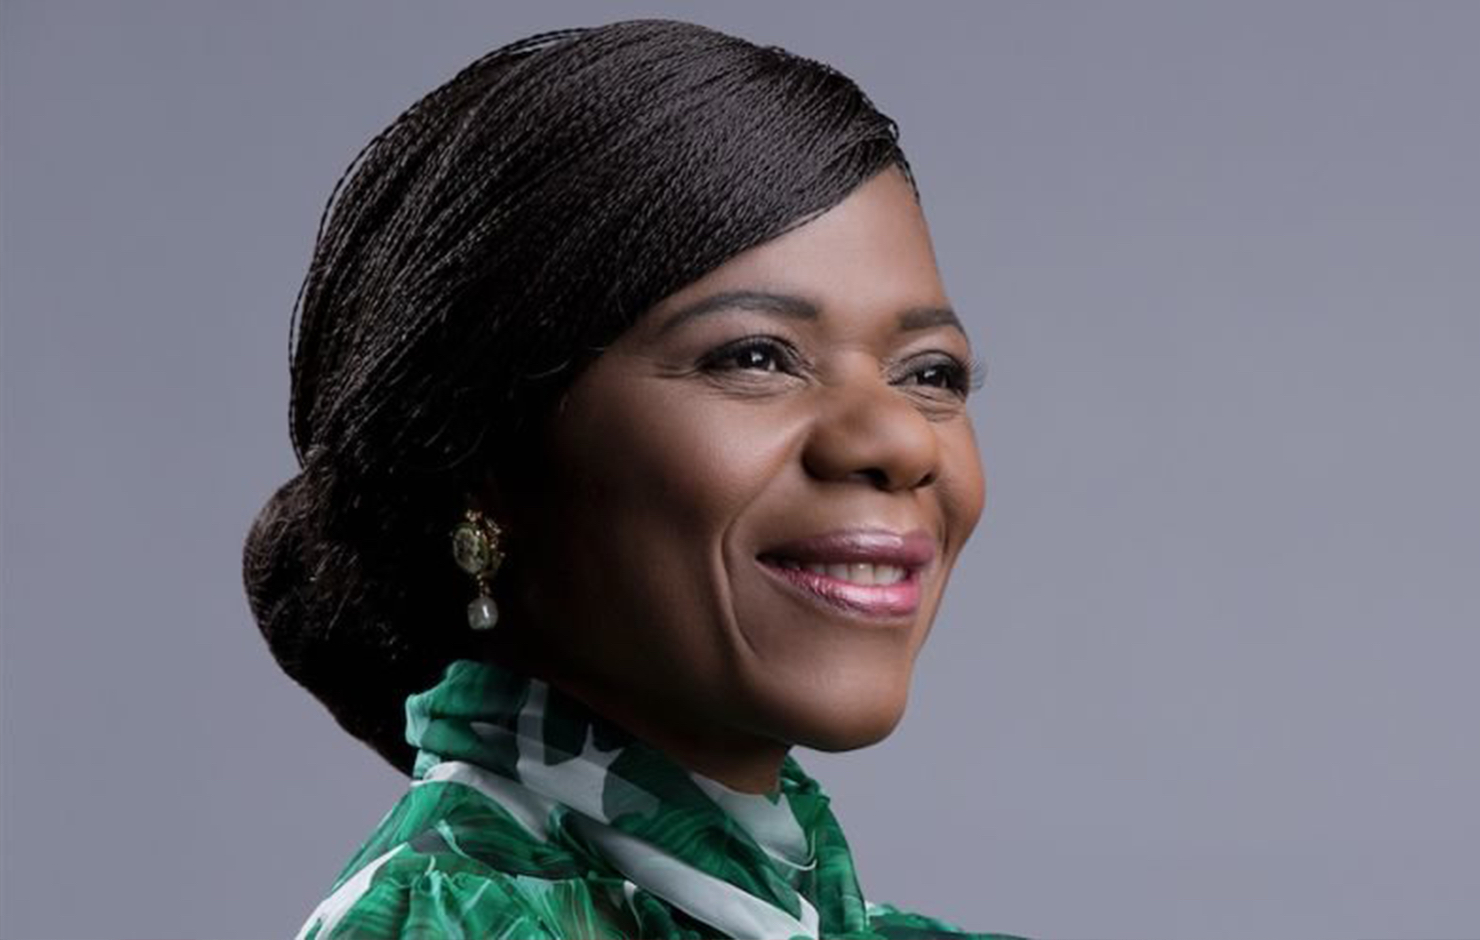 Thuli Madonsela - “Council of Champions” appointed to drive the social justice project!